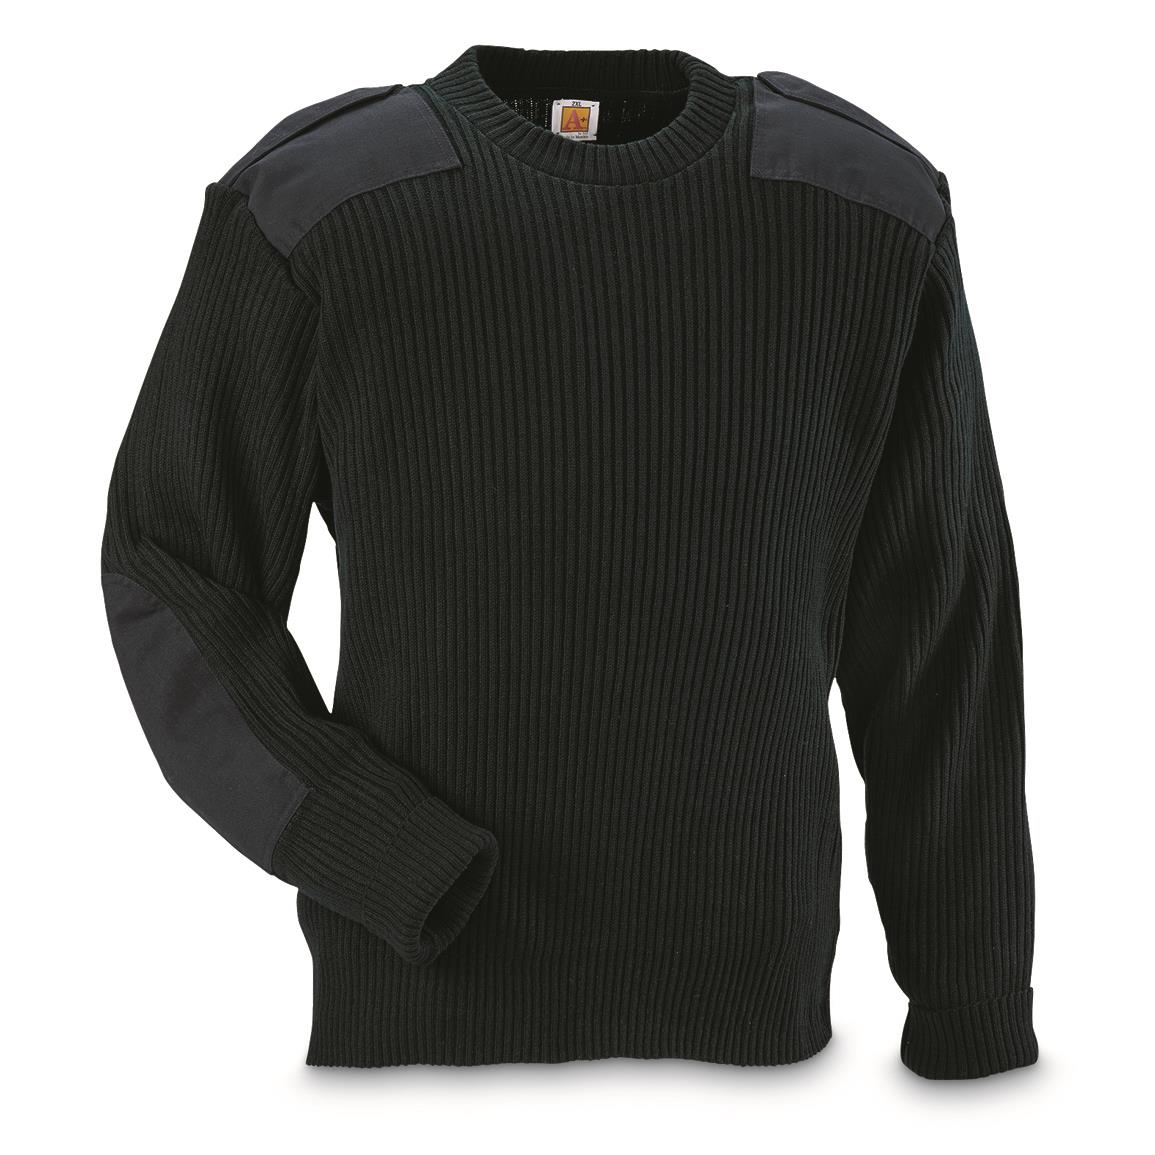 Male thick warm loose sweater plus size scasual uniform